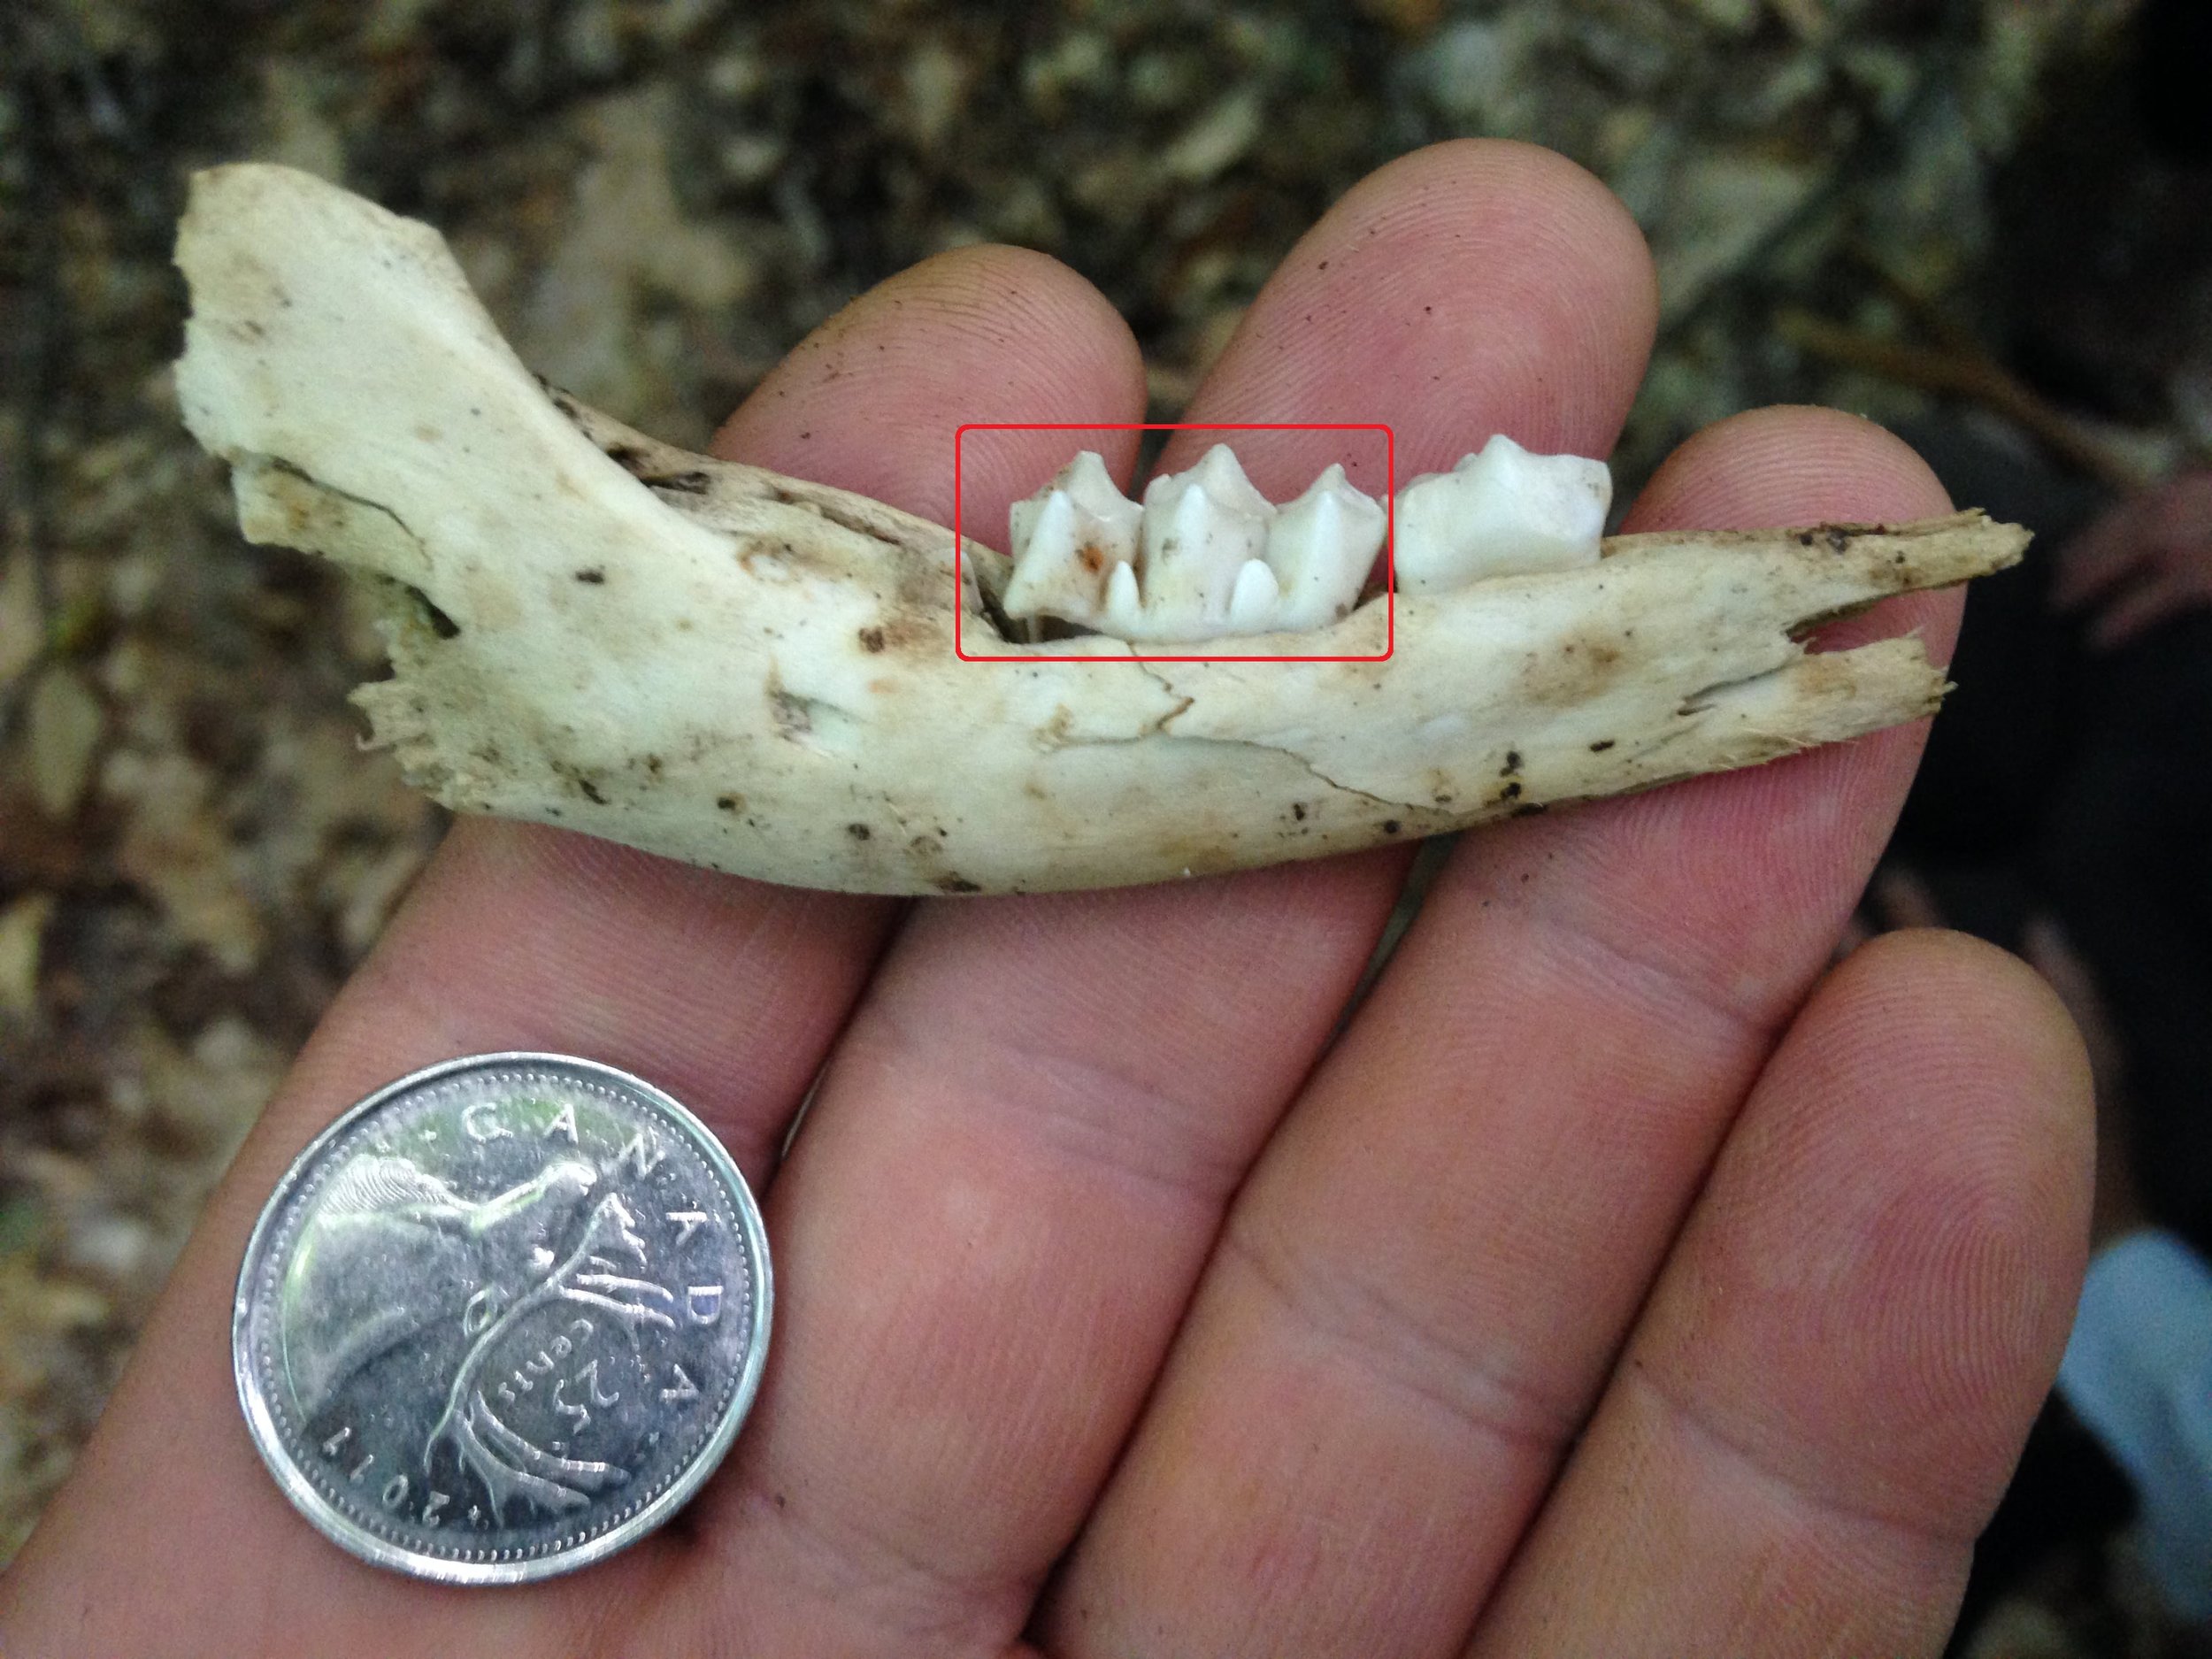 Lingual aspect of the left mandible showing 2nd and 3rd premolars (counting anterior towards the posterior).